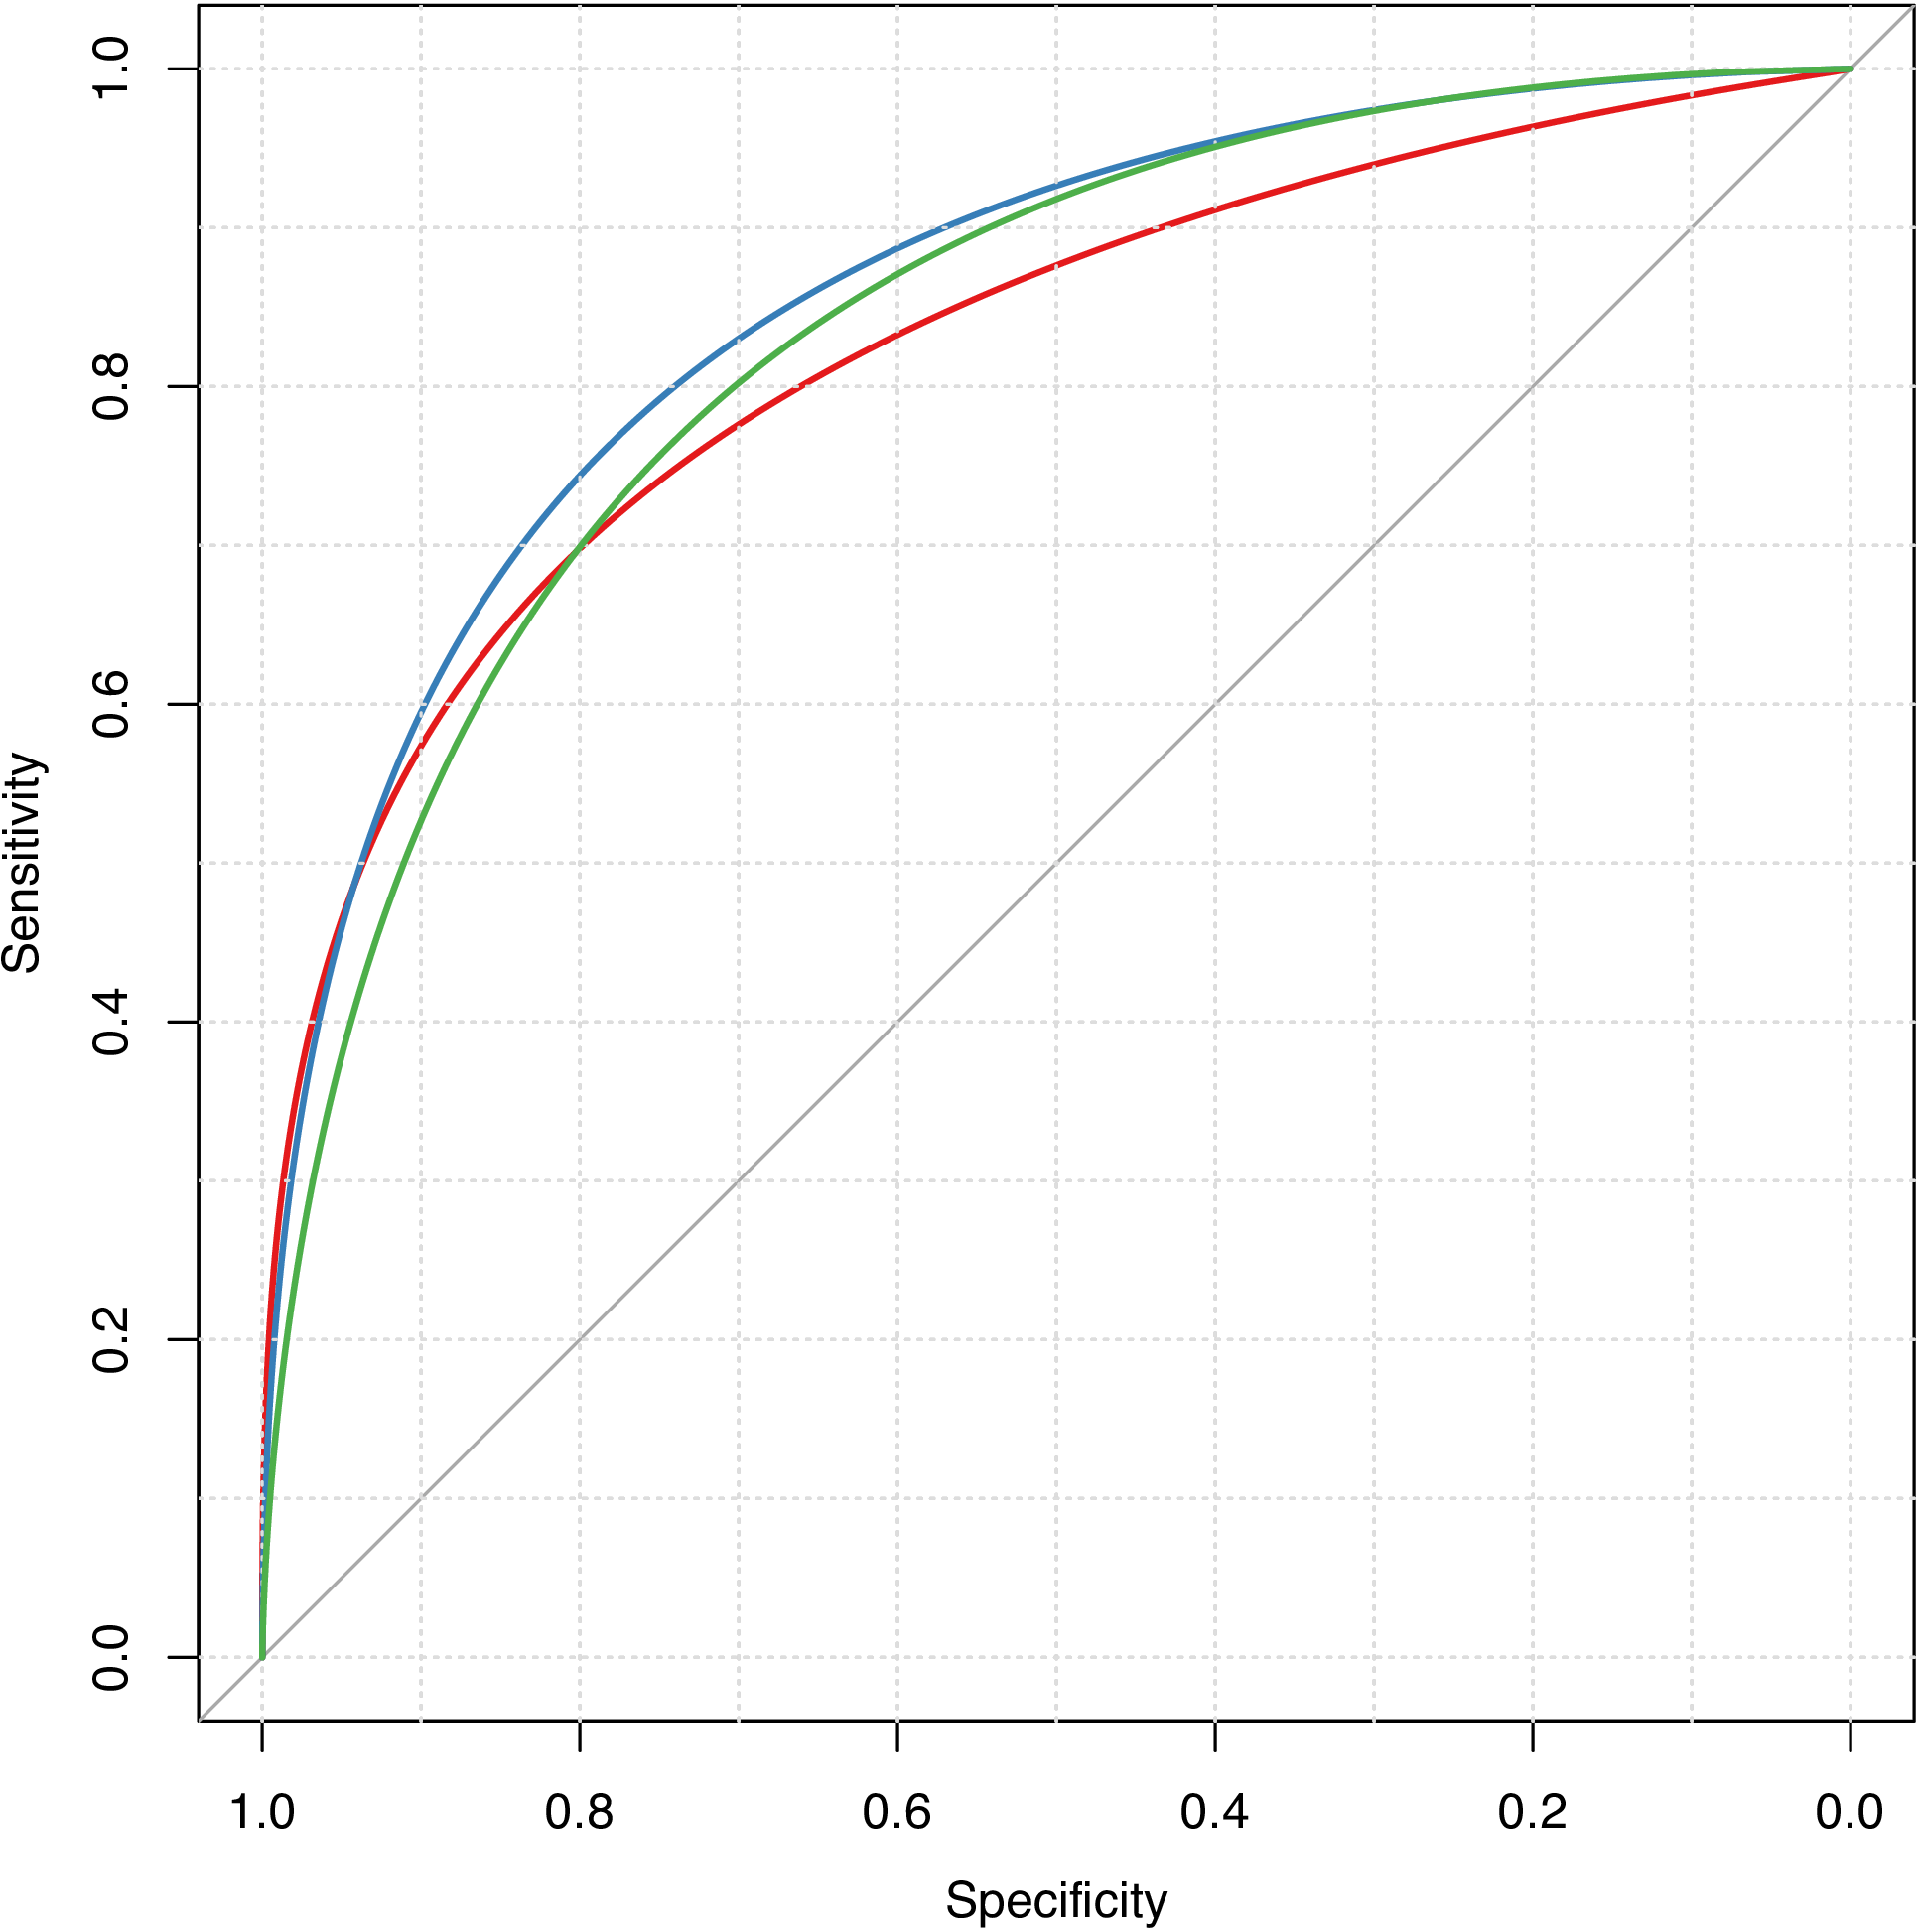 Figure 4: Smoothed ROC curves for different fingerprint types.